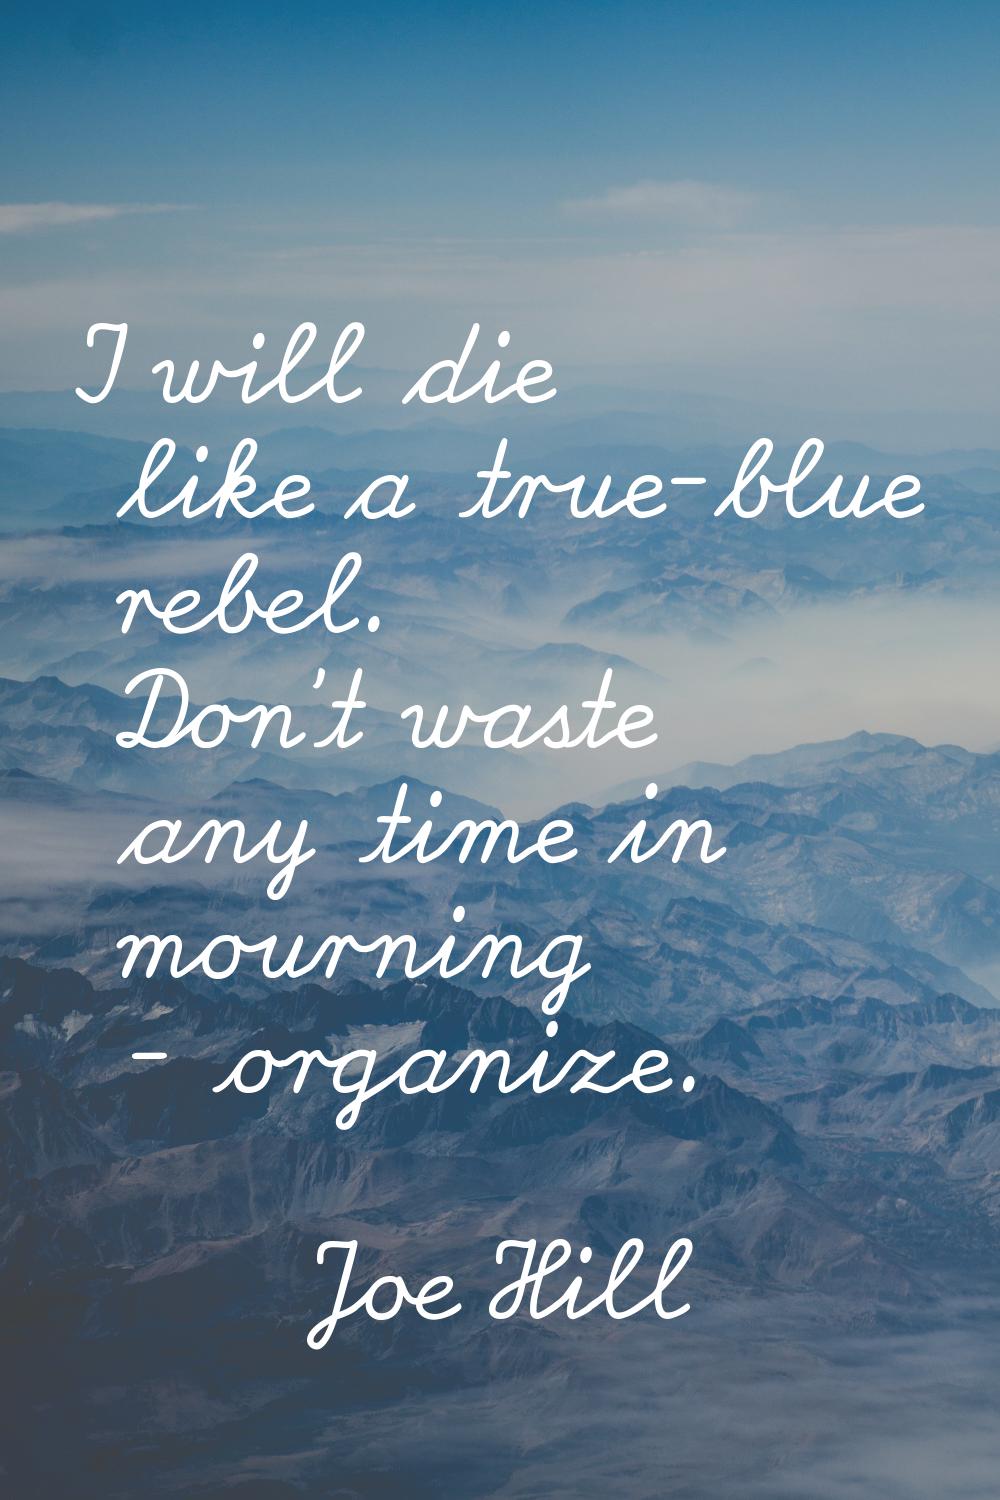 I will die like a true-blue rebel. Don't waste any time in mourning - organize.